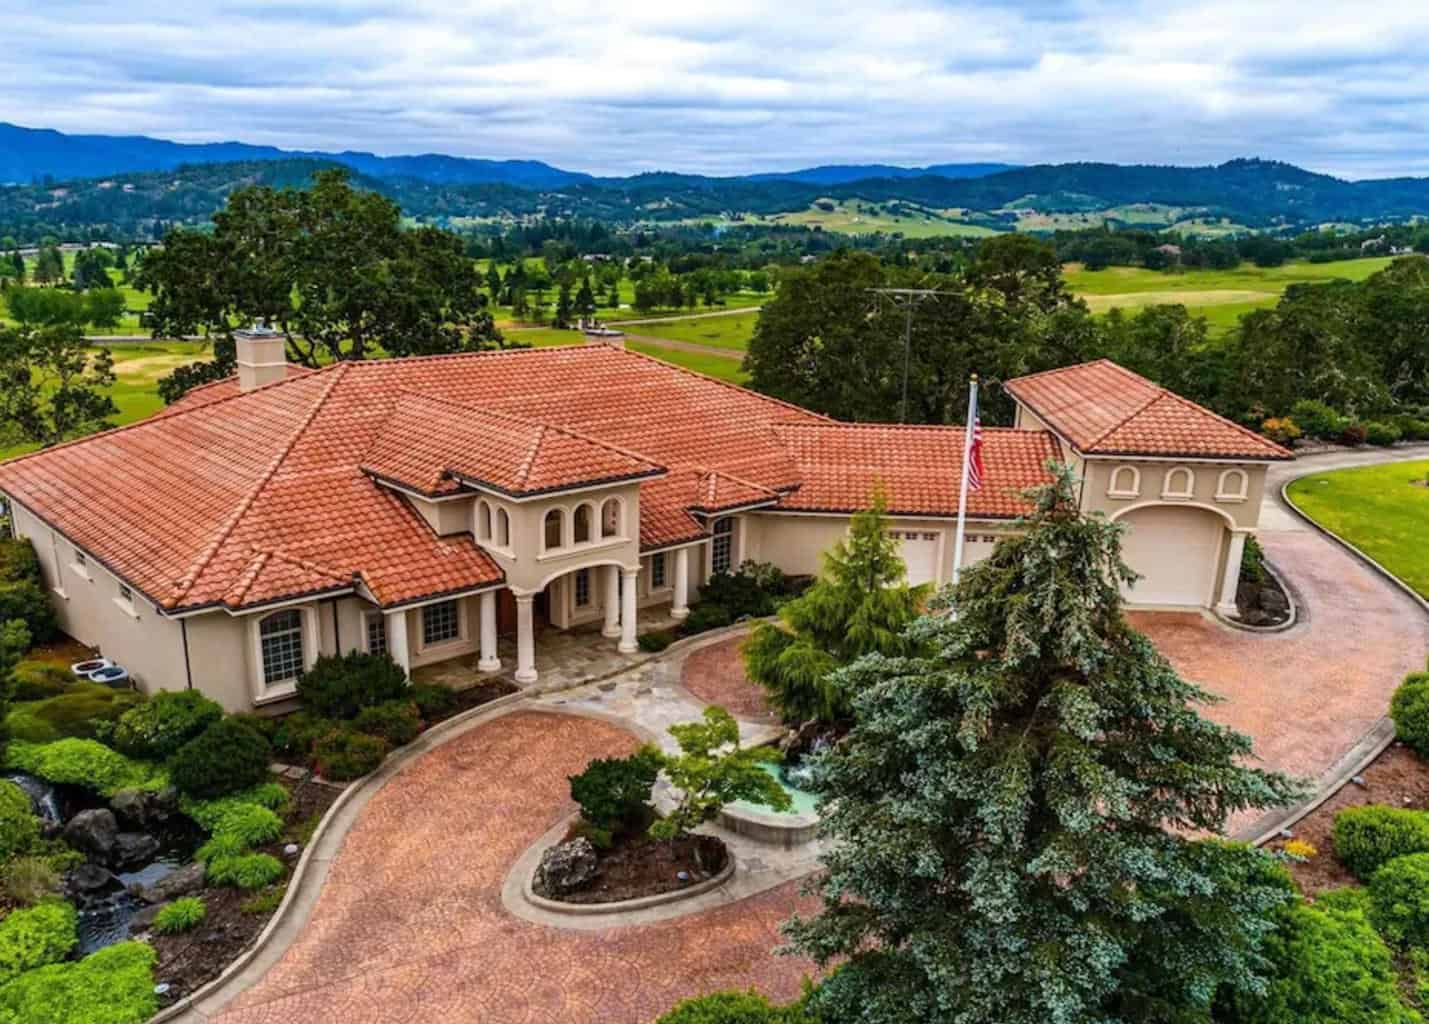 tuscan style villa with mountain views in the background an epic oregon airbnb wedding venue